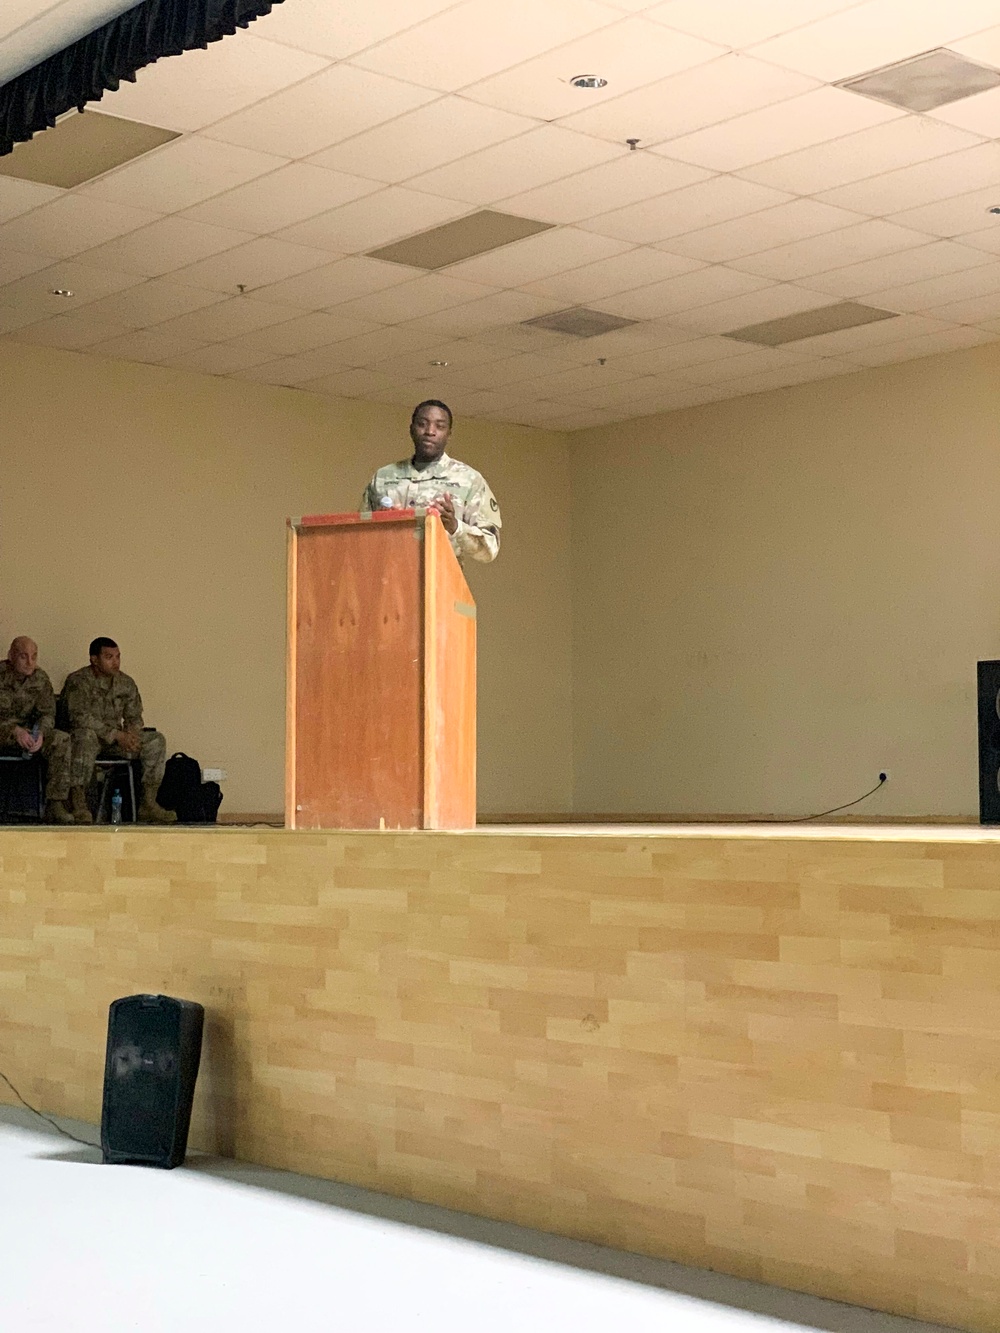 408th Contracting Support Brigade Hosts Combating Trafficking in Persons Forum